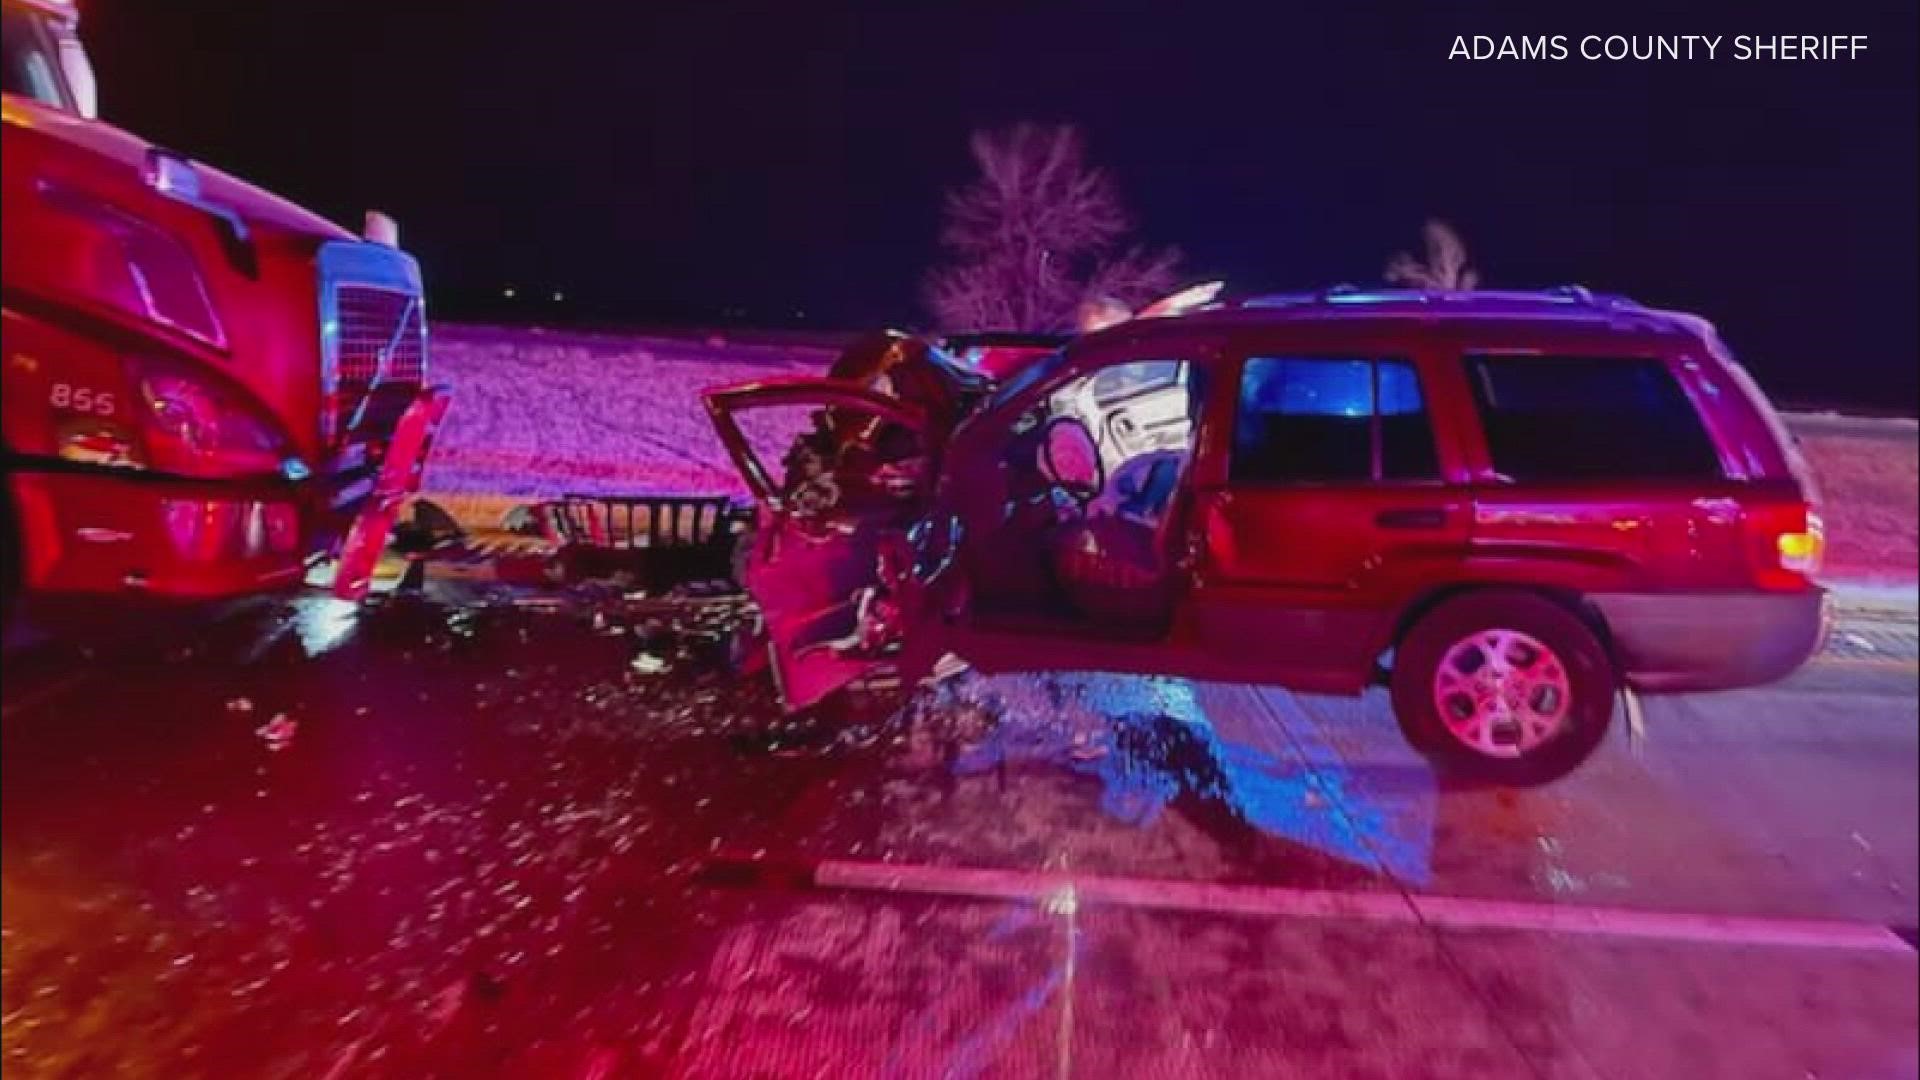 An 83-year-old man driving a Jeep Grand Cherokee crashed into a deputy's SUV near Deer Trail.